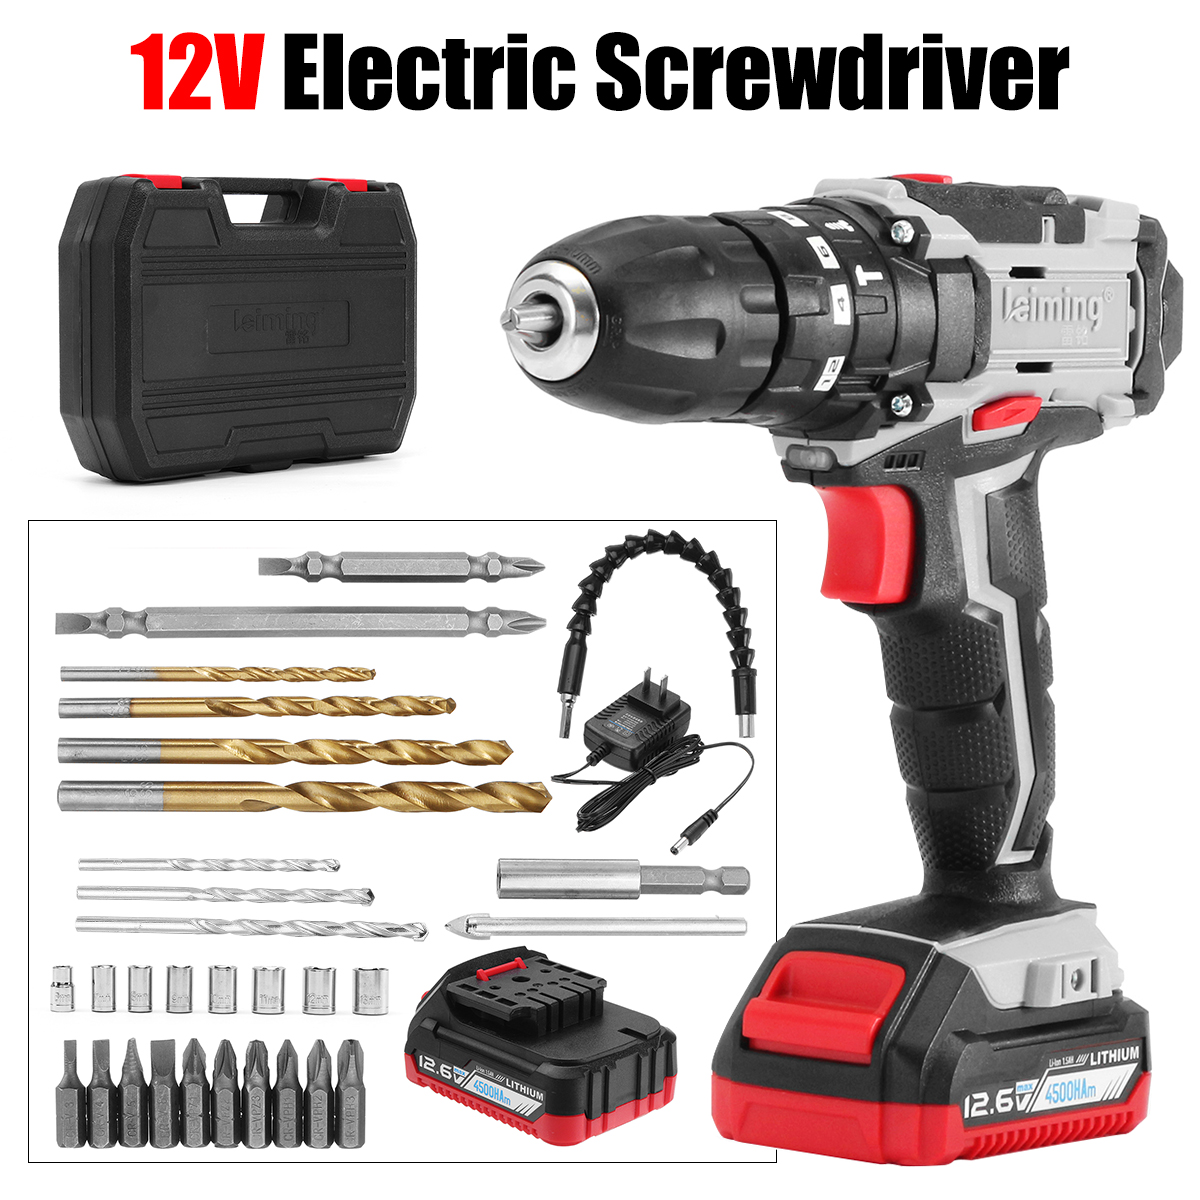 126V-Li-ion-Battery-Electric-Screwdriver-Cordless-Rechargeable-Power-Drill-with-LED-light-1297752-1